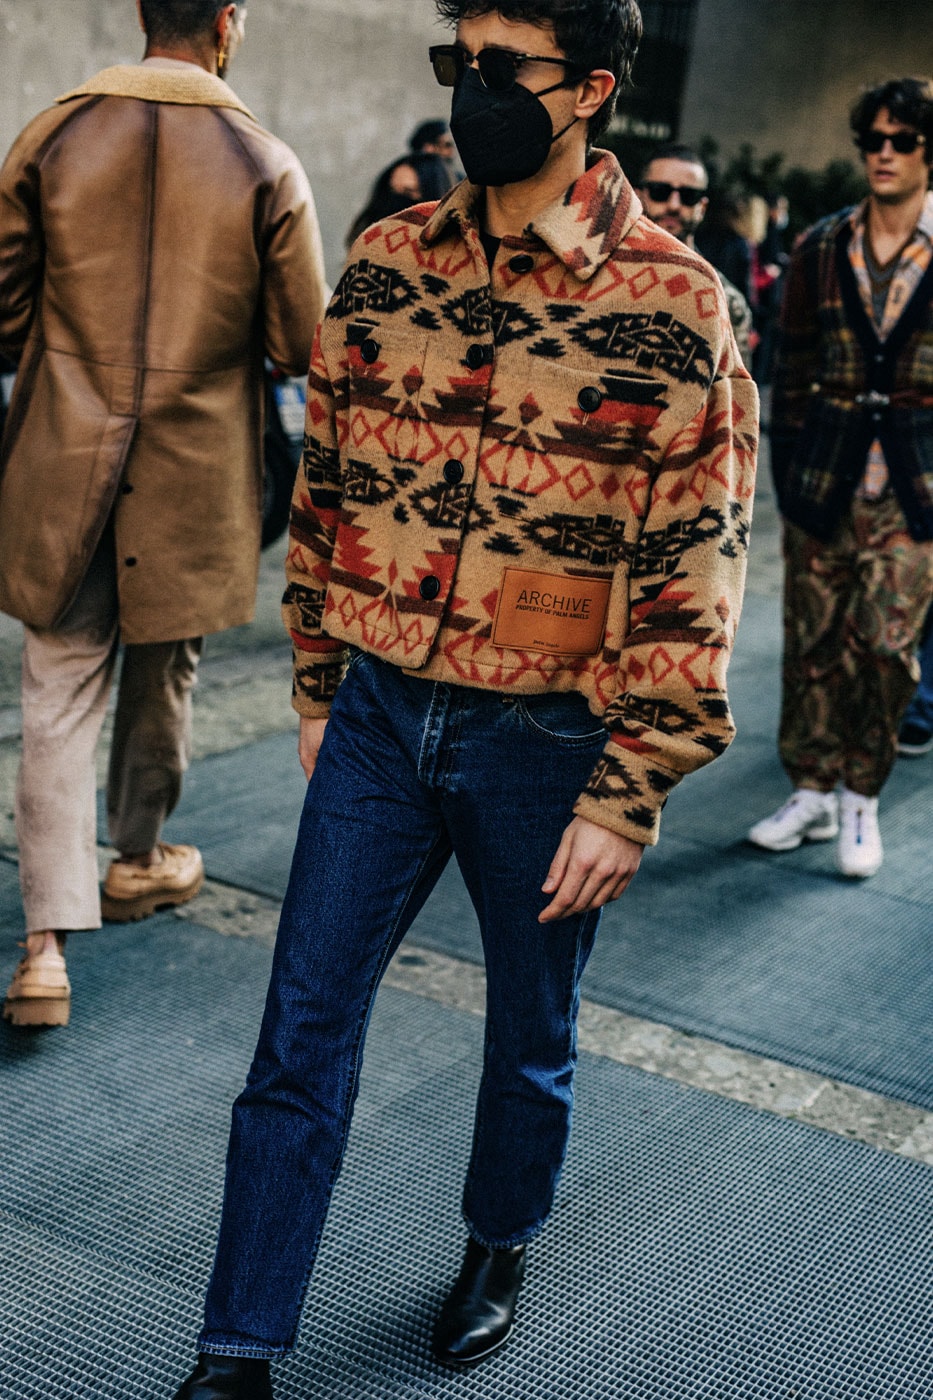 Milan Men's Fashion Week FW22 Street Style Served Coziness in Standout Patterns and Baggy Silhouettes fendi prada comme des garcons jw anderson